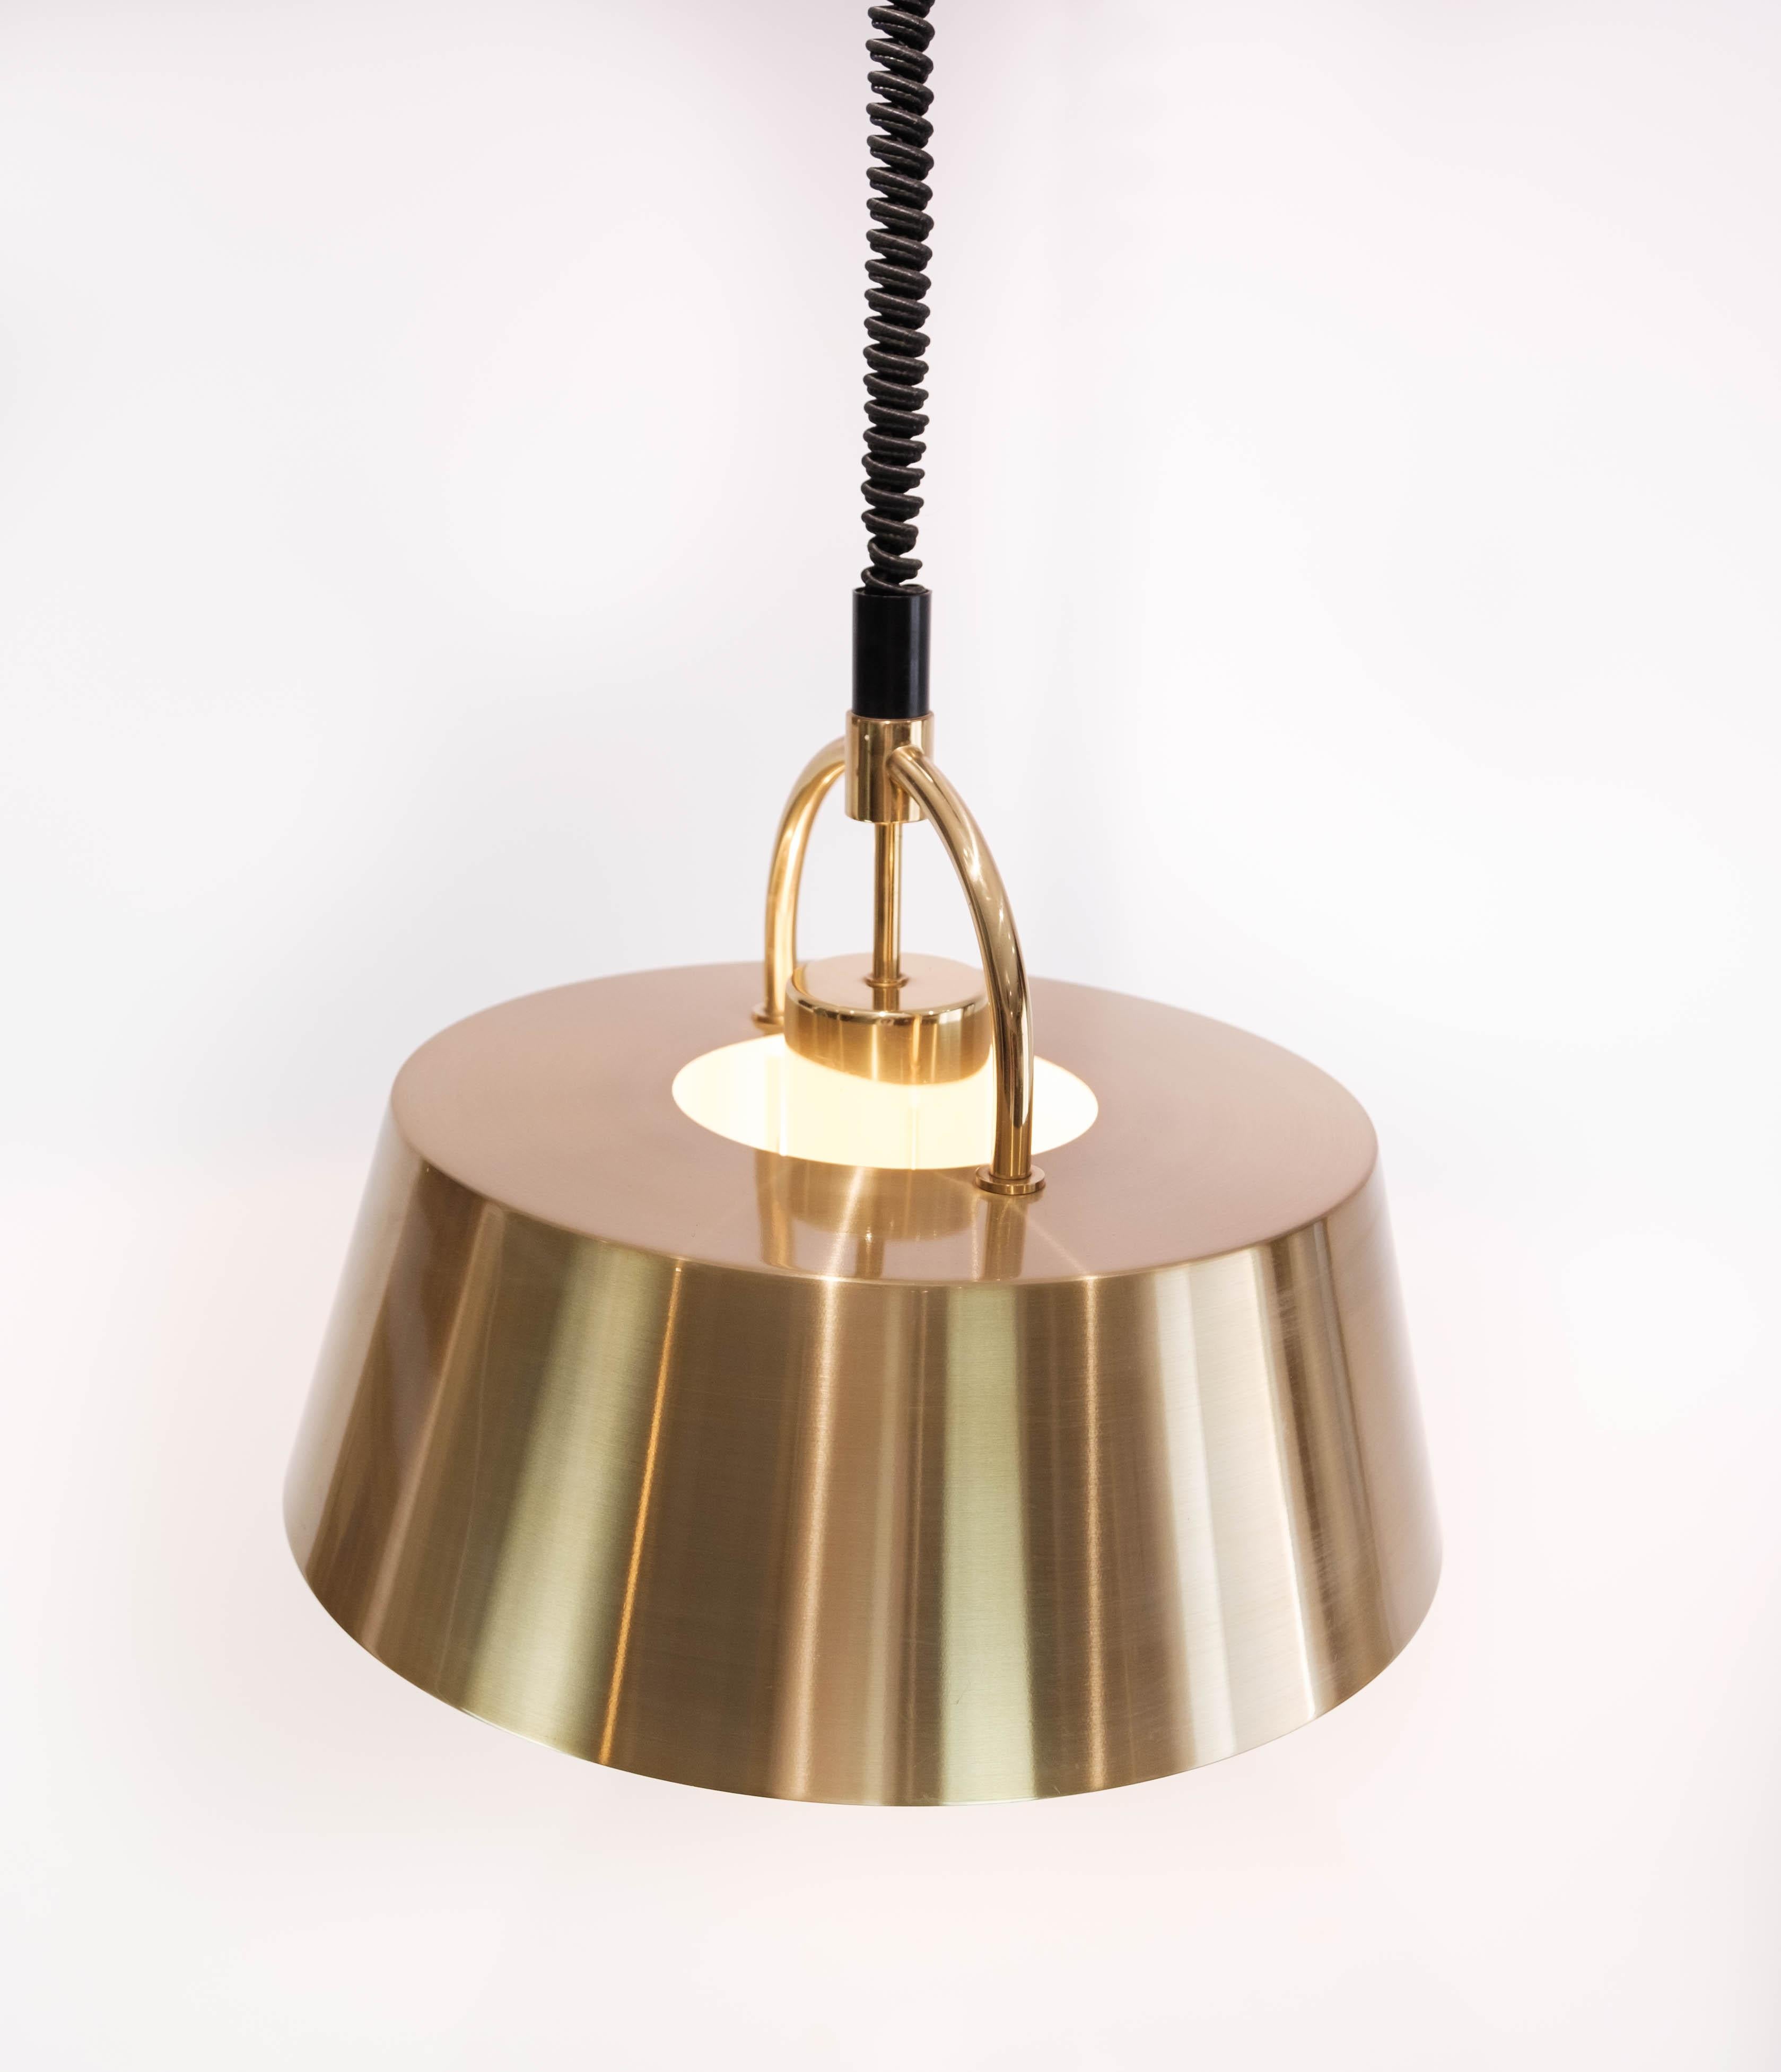 Ceiling Pendant, Model Hercules, by Jo Hammerborg for Fog and Mørup, 1960s In Good Condition For Sale In Lejre, DK